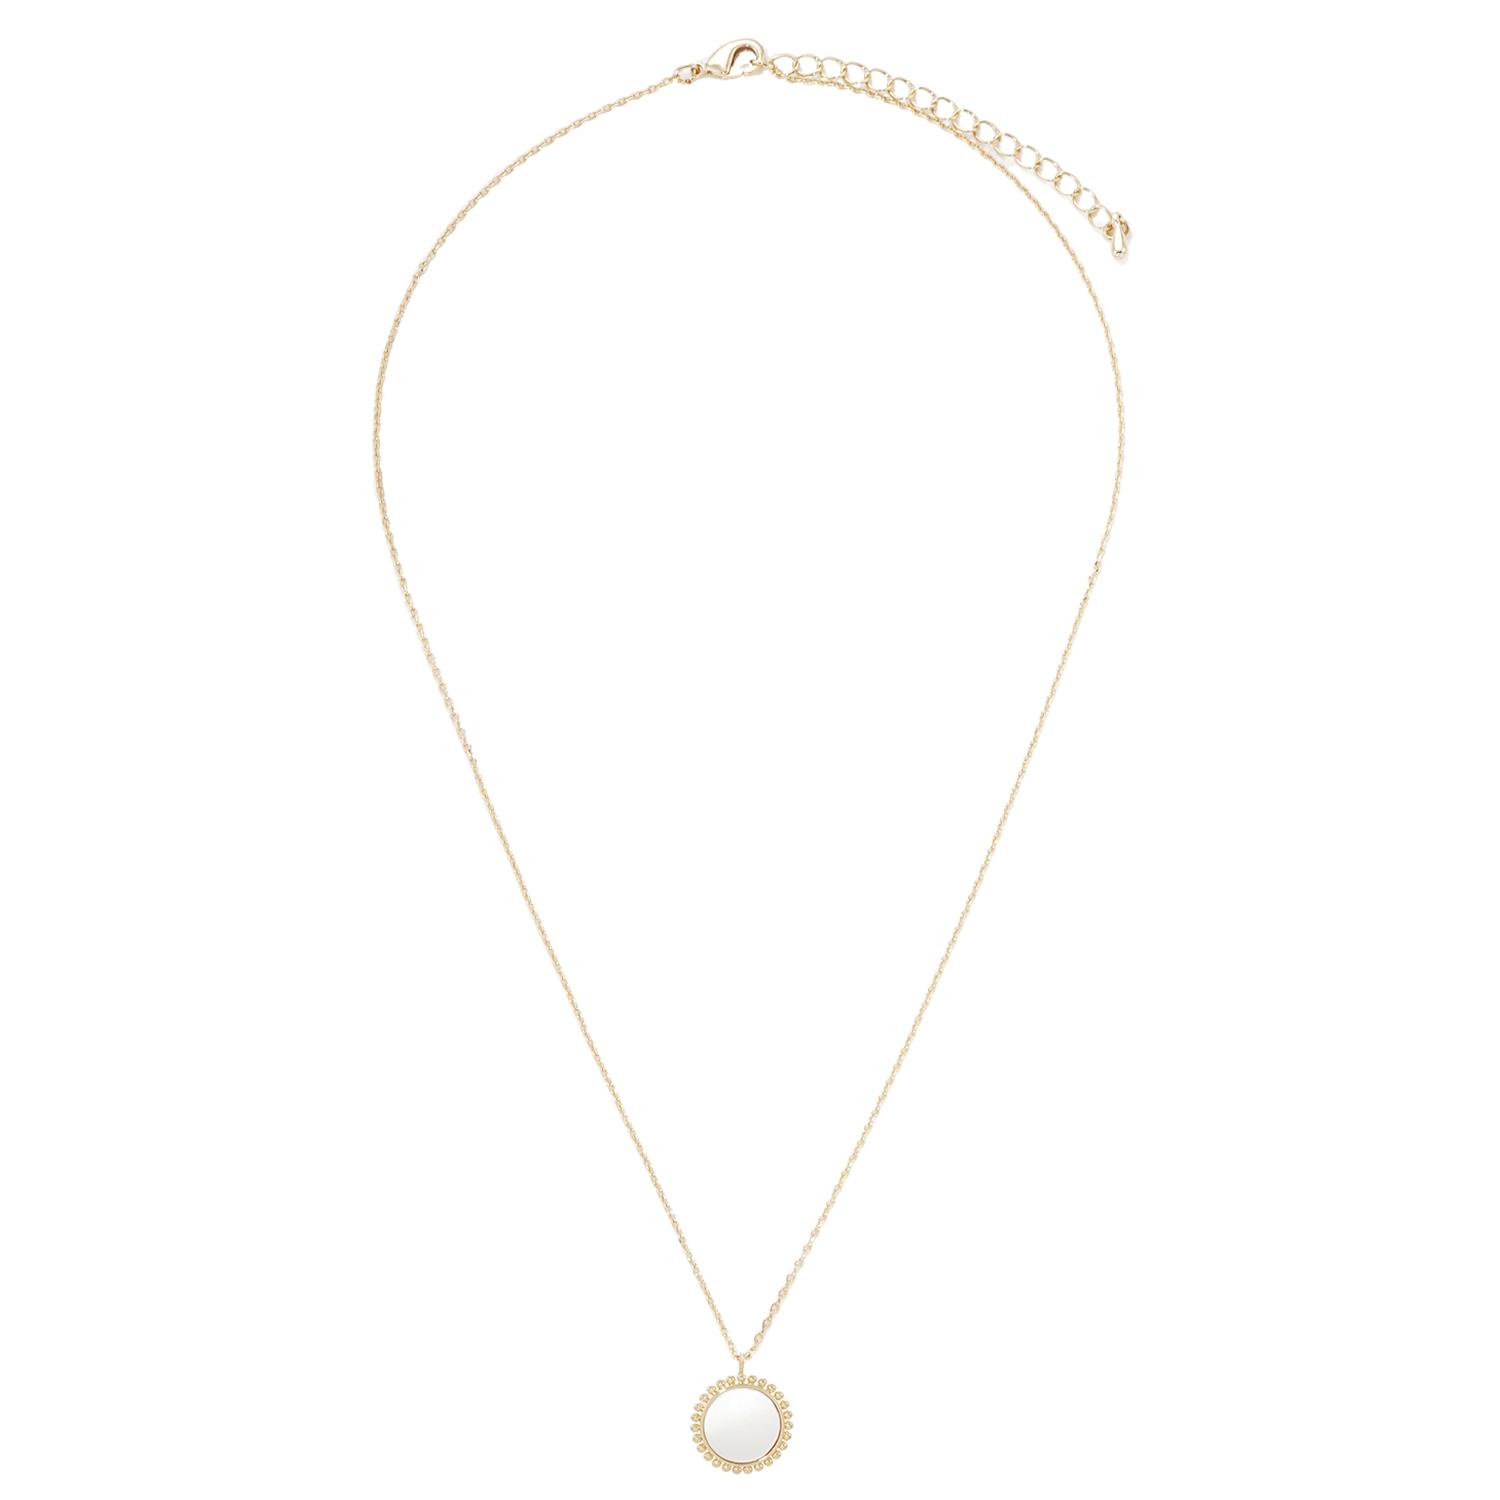 18K GOLD RHODIUM DIPPED EXTRAORDINARY NECKLACE